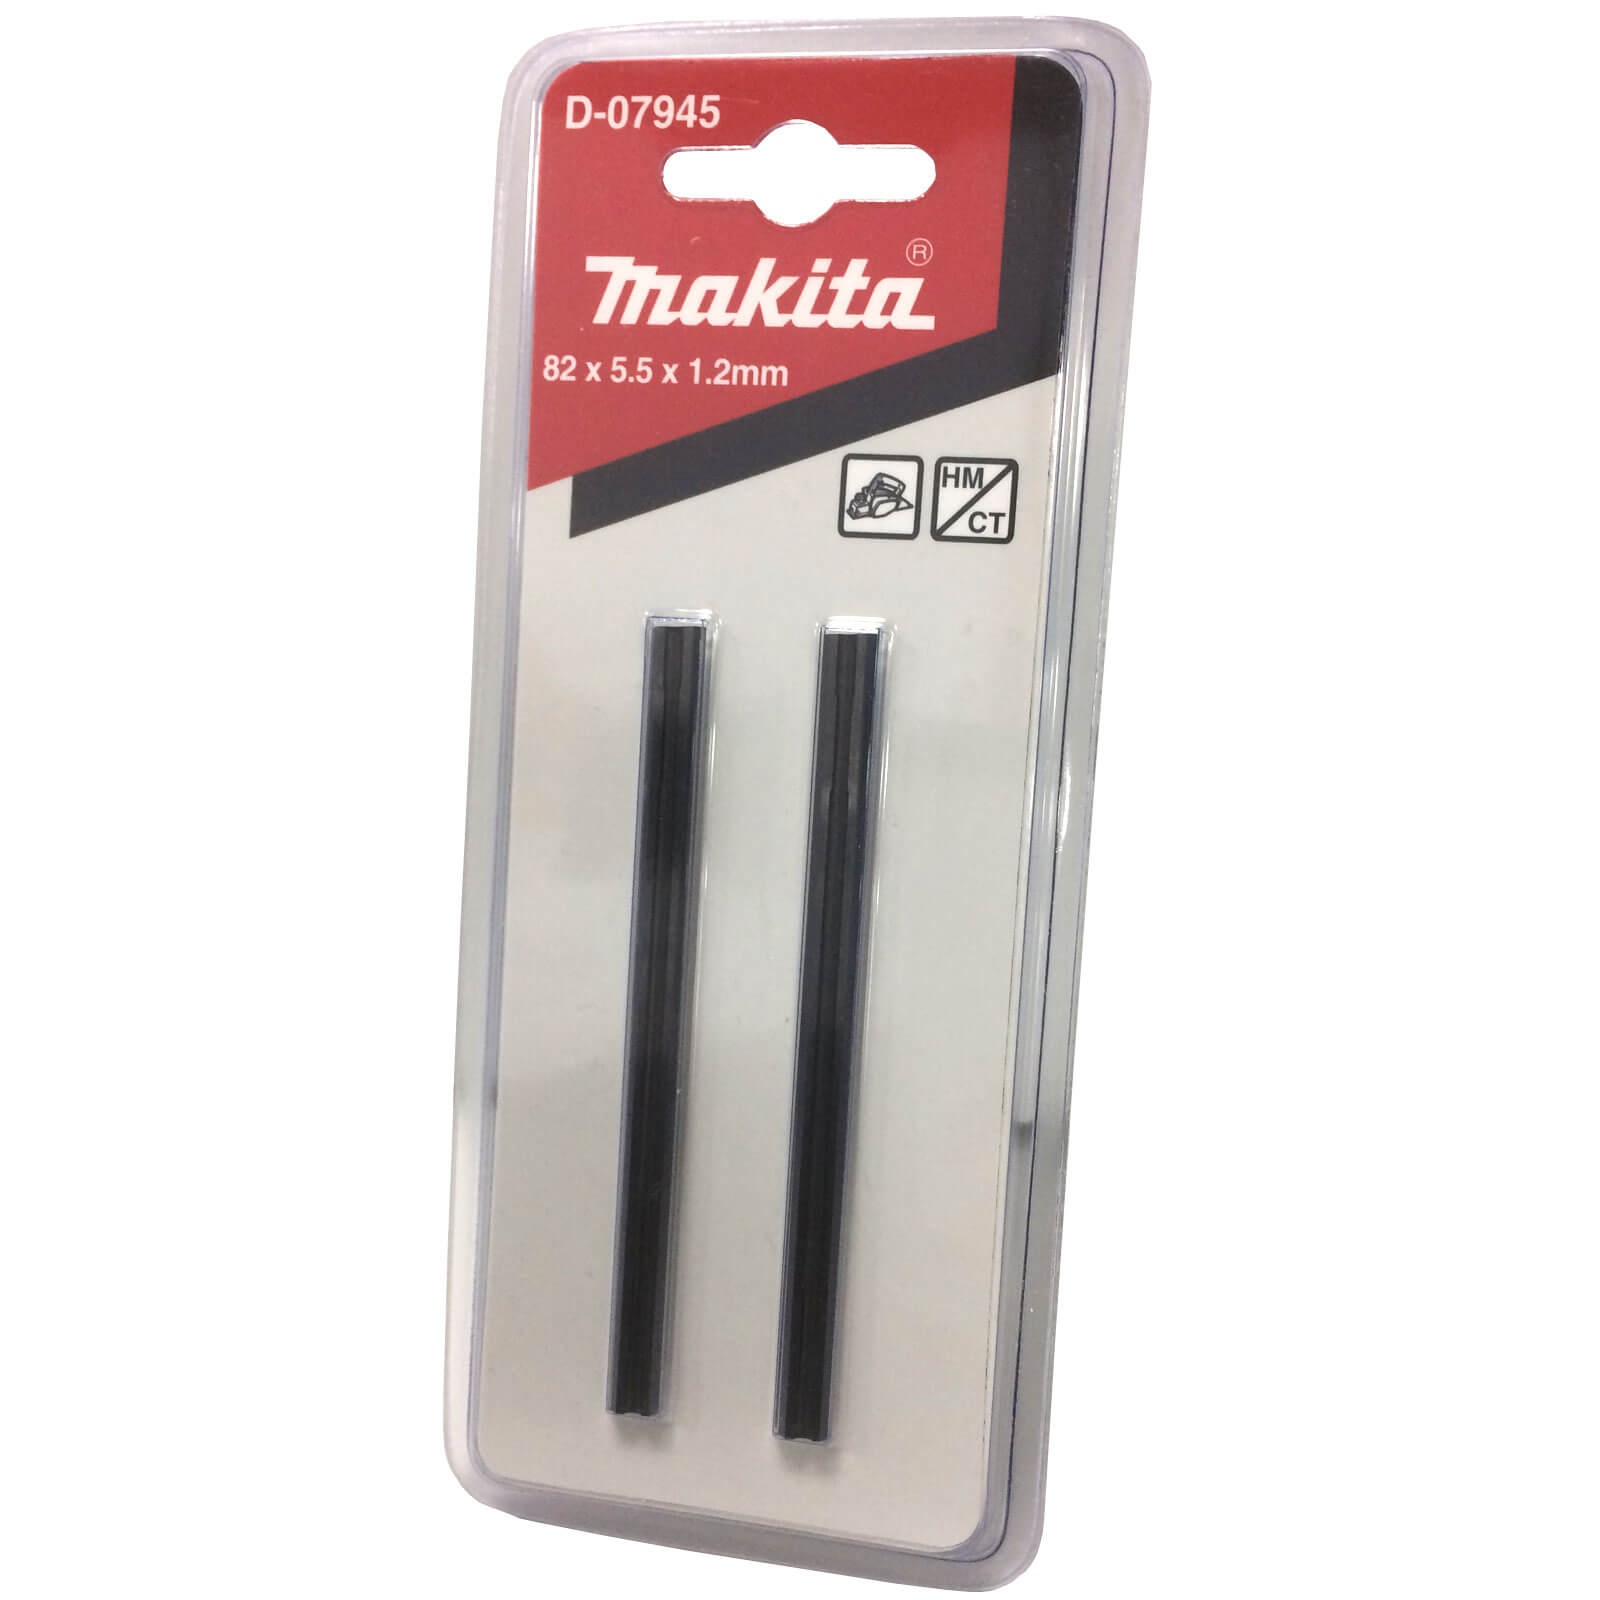 Photos - Power Tool Accessory Makita 82mm TCT Planer Blades Pack of 2 D-07945 